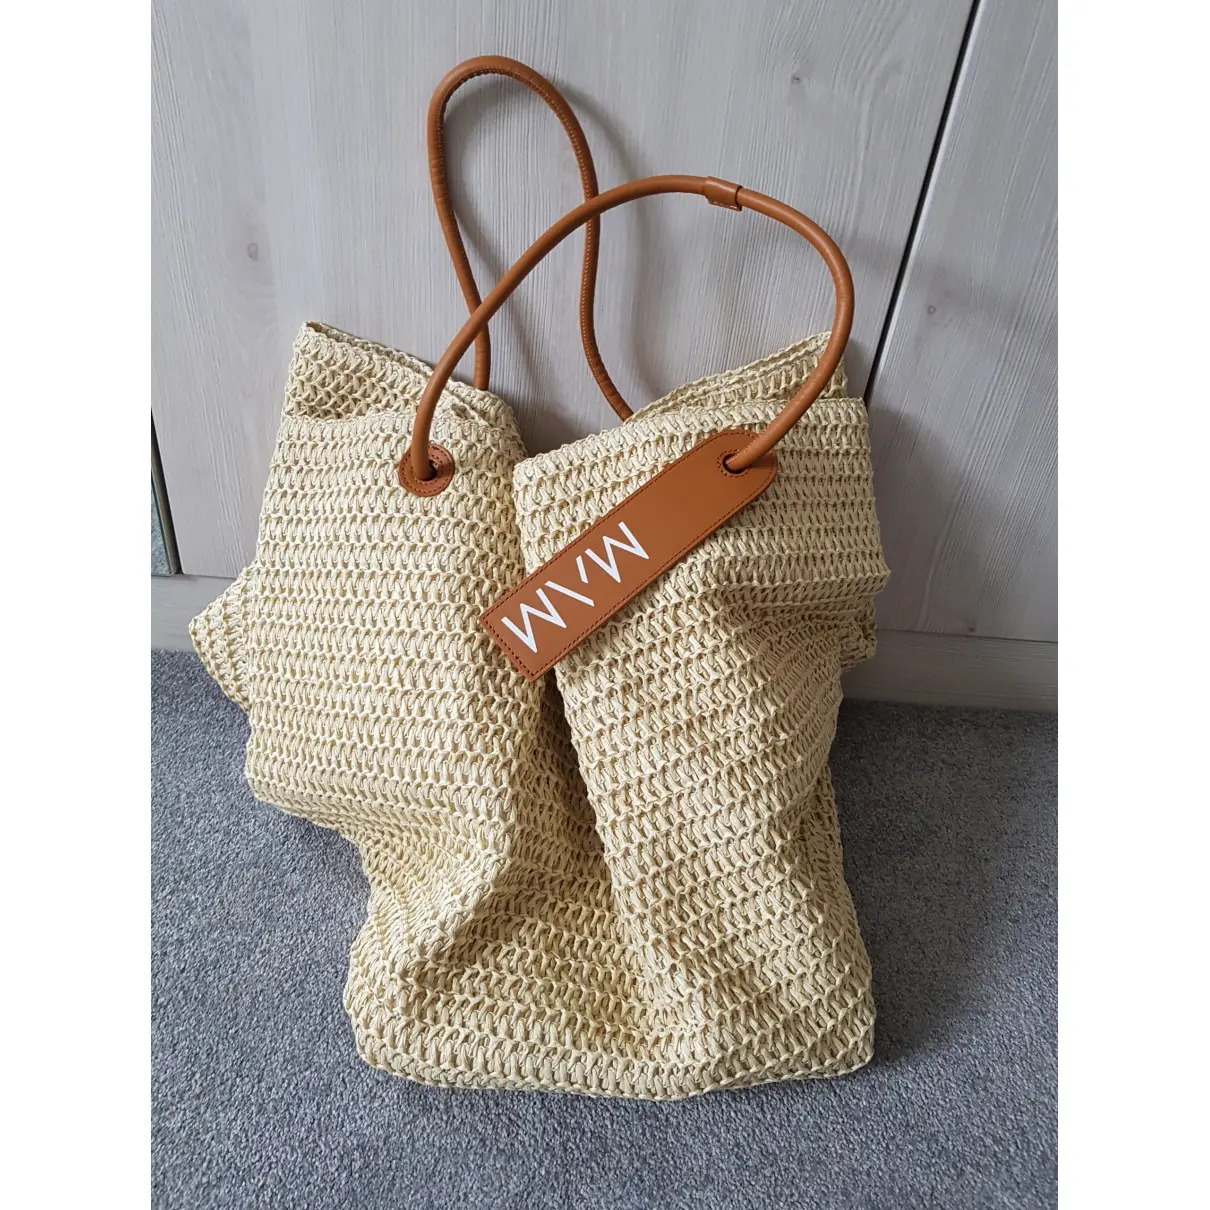 Buy MAM Cloth tote online